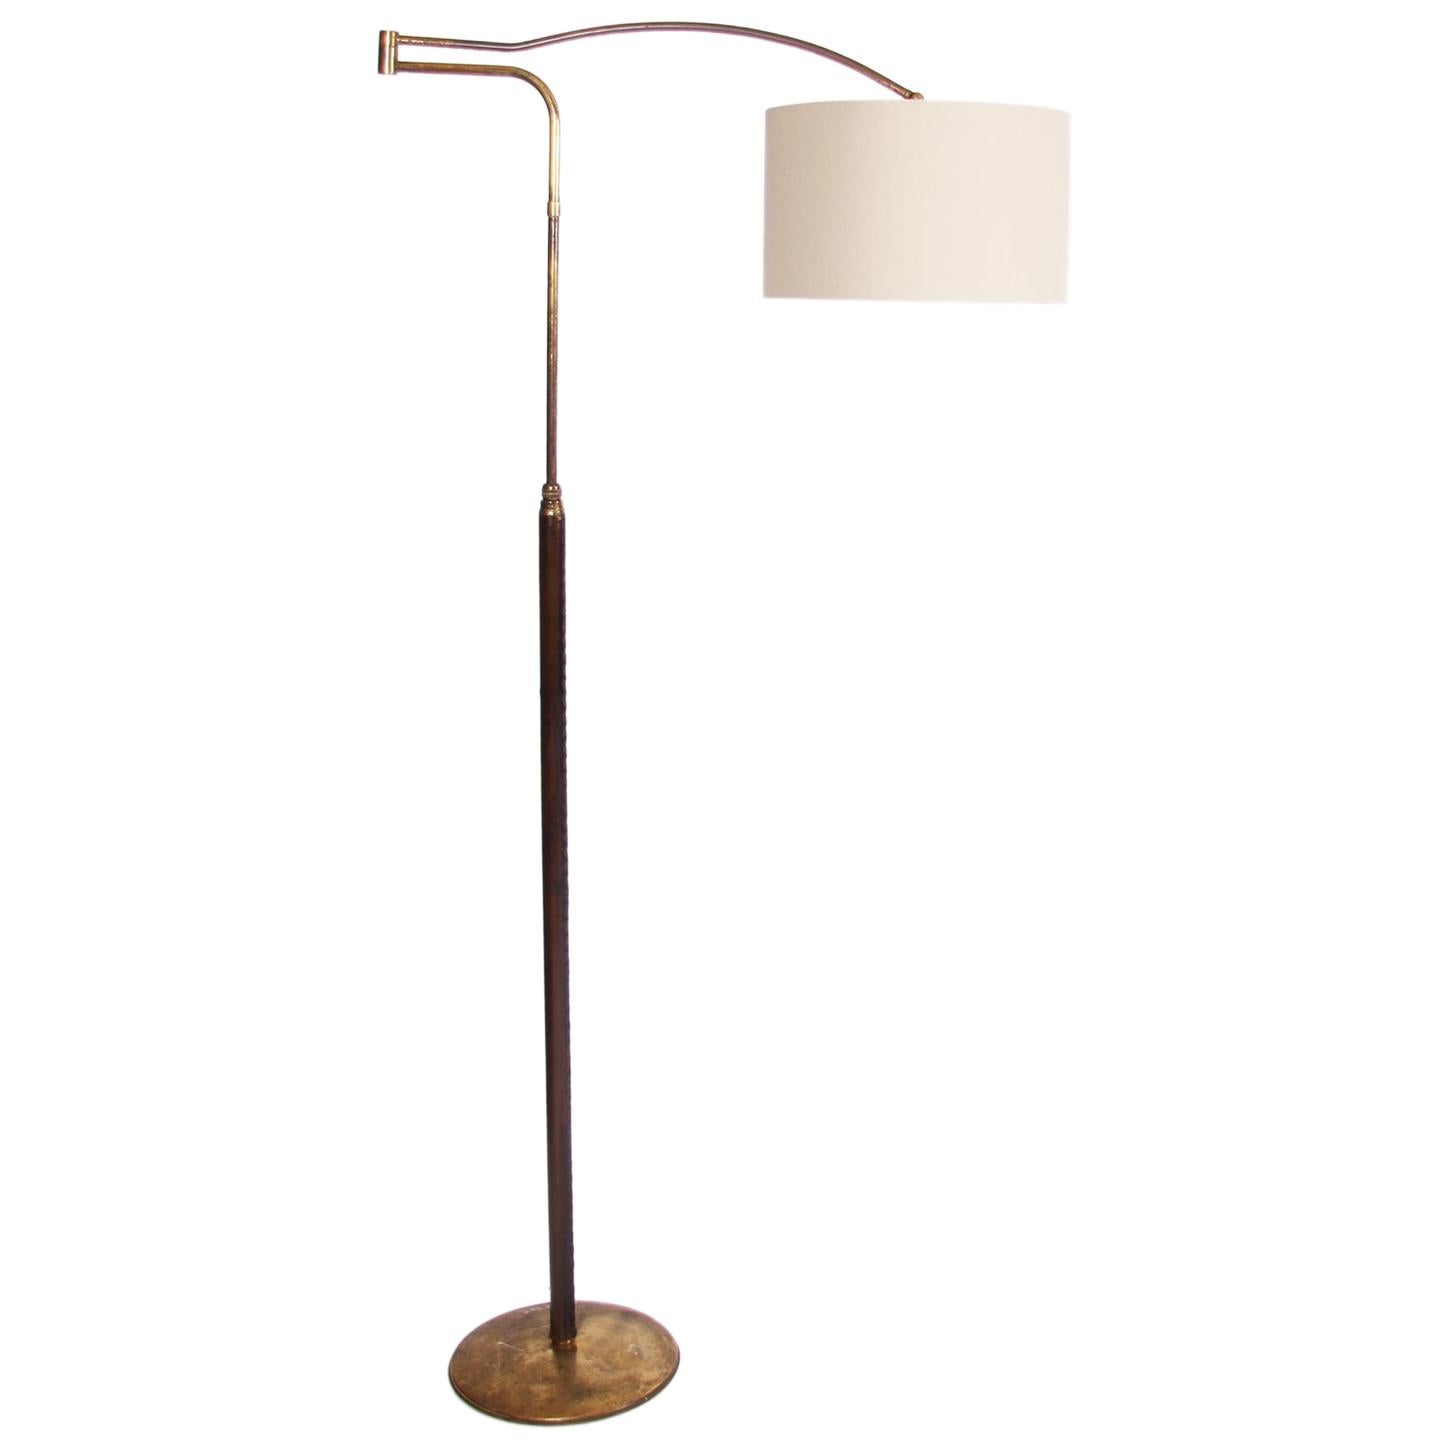 Mid-20th Century Brass and Leather-Covered Swing Arm Floor Lamp